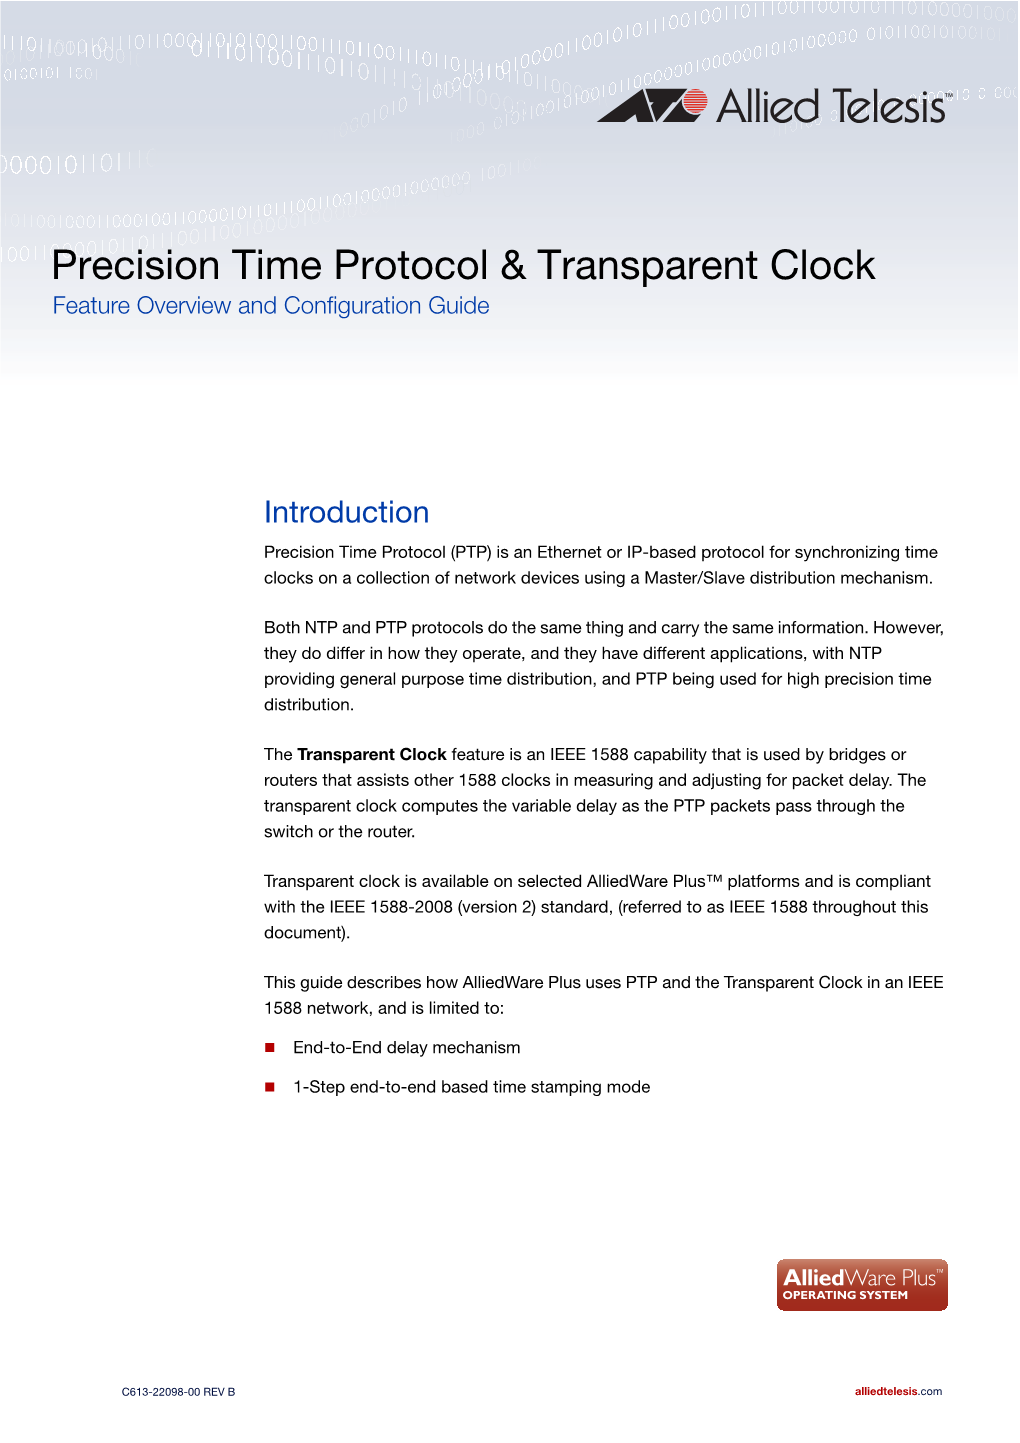 PTP) Is an Ethernet Or IP-Based Protocol for Synchronizing Time Clocks on a Collection of Network Devices Using a Master/Slave Distribution Mechanism